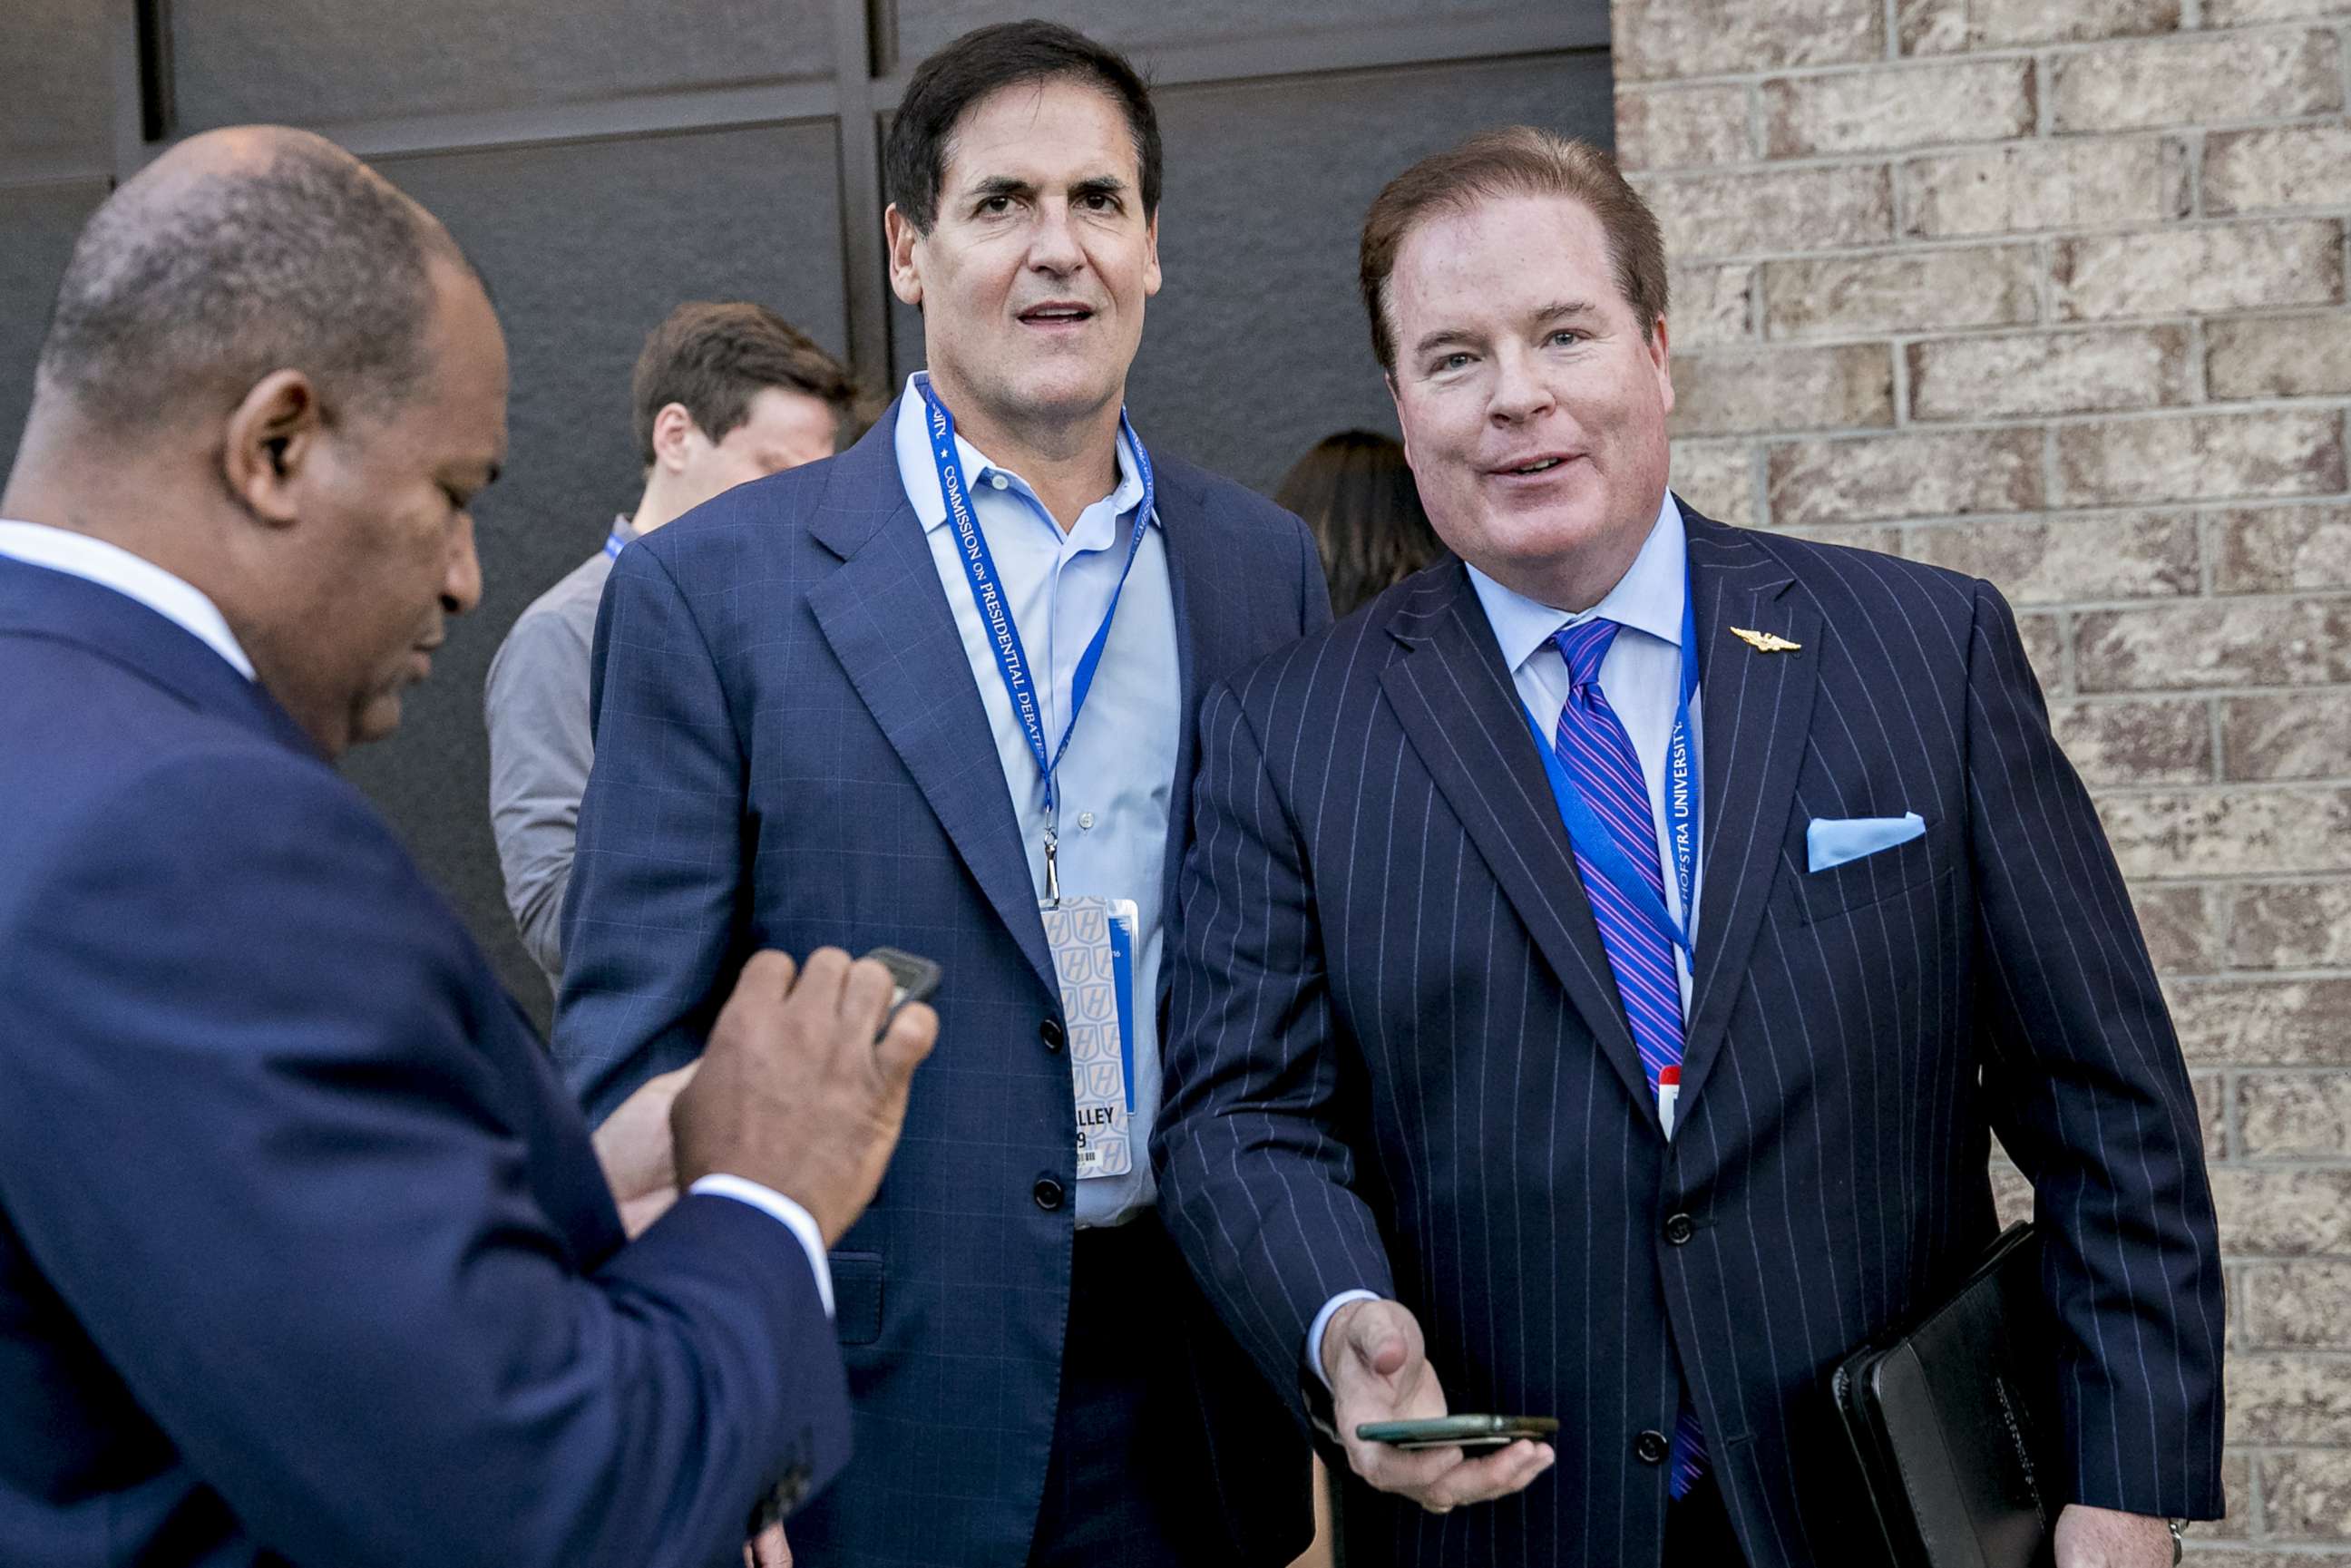 PHOTO:Stephen Calk, founder and chief executive officer of Chicago Bancorp, right, and Mark Cuban stand outside the media filing center ahead of the first presidential debate in Hempstead, New York, Sept. 26, 2016.